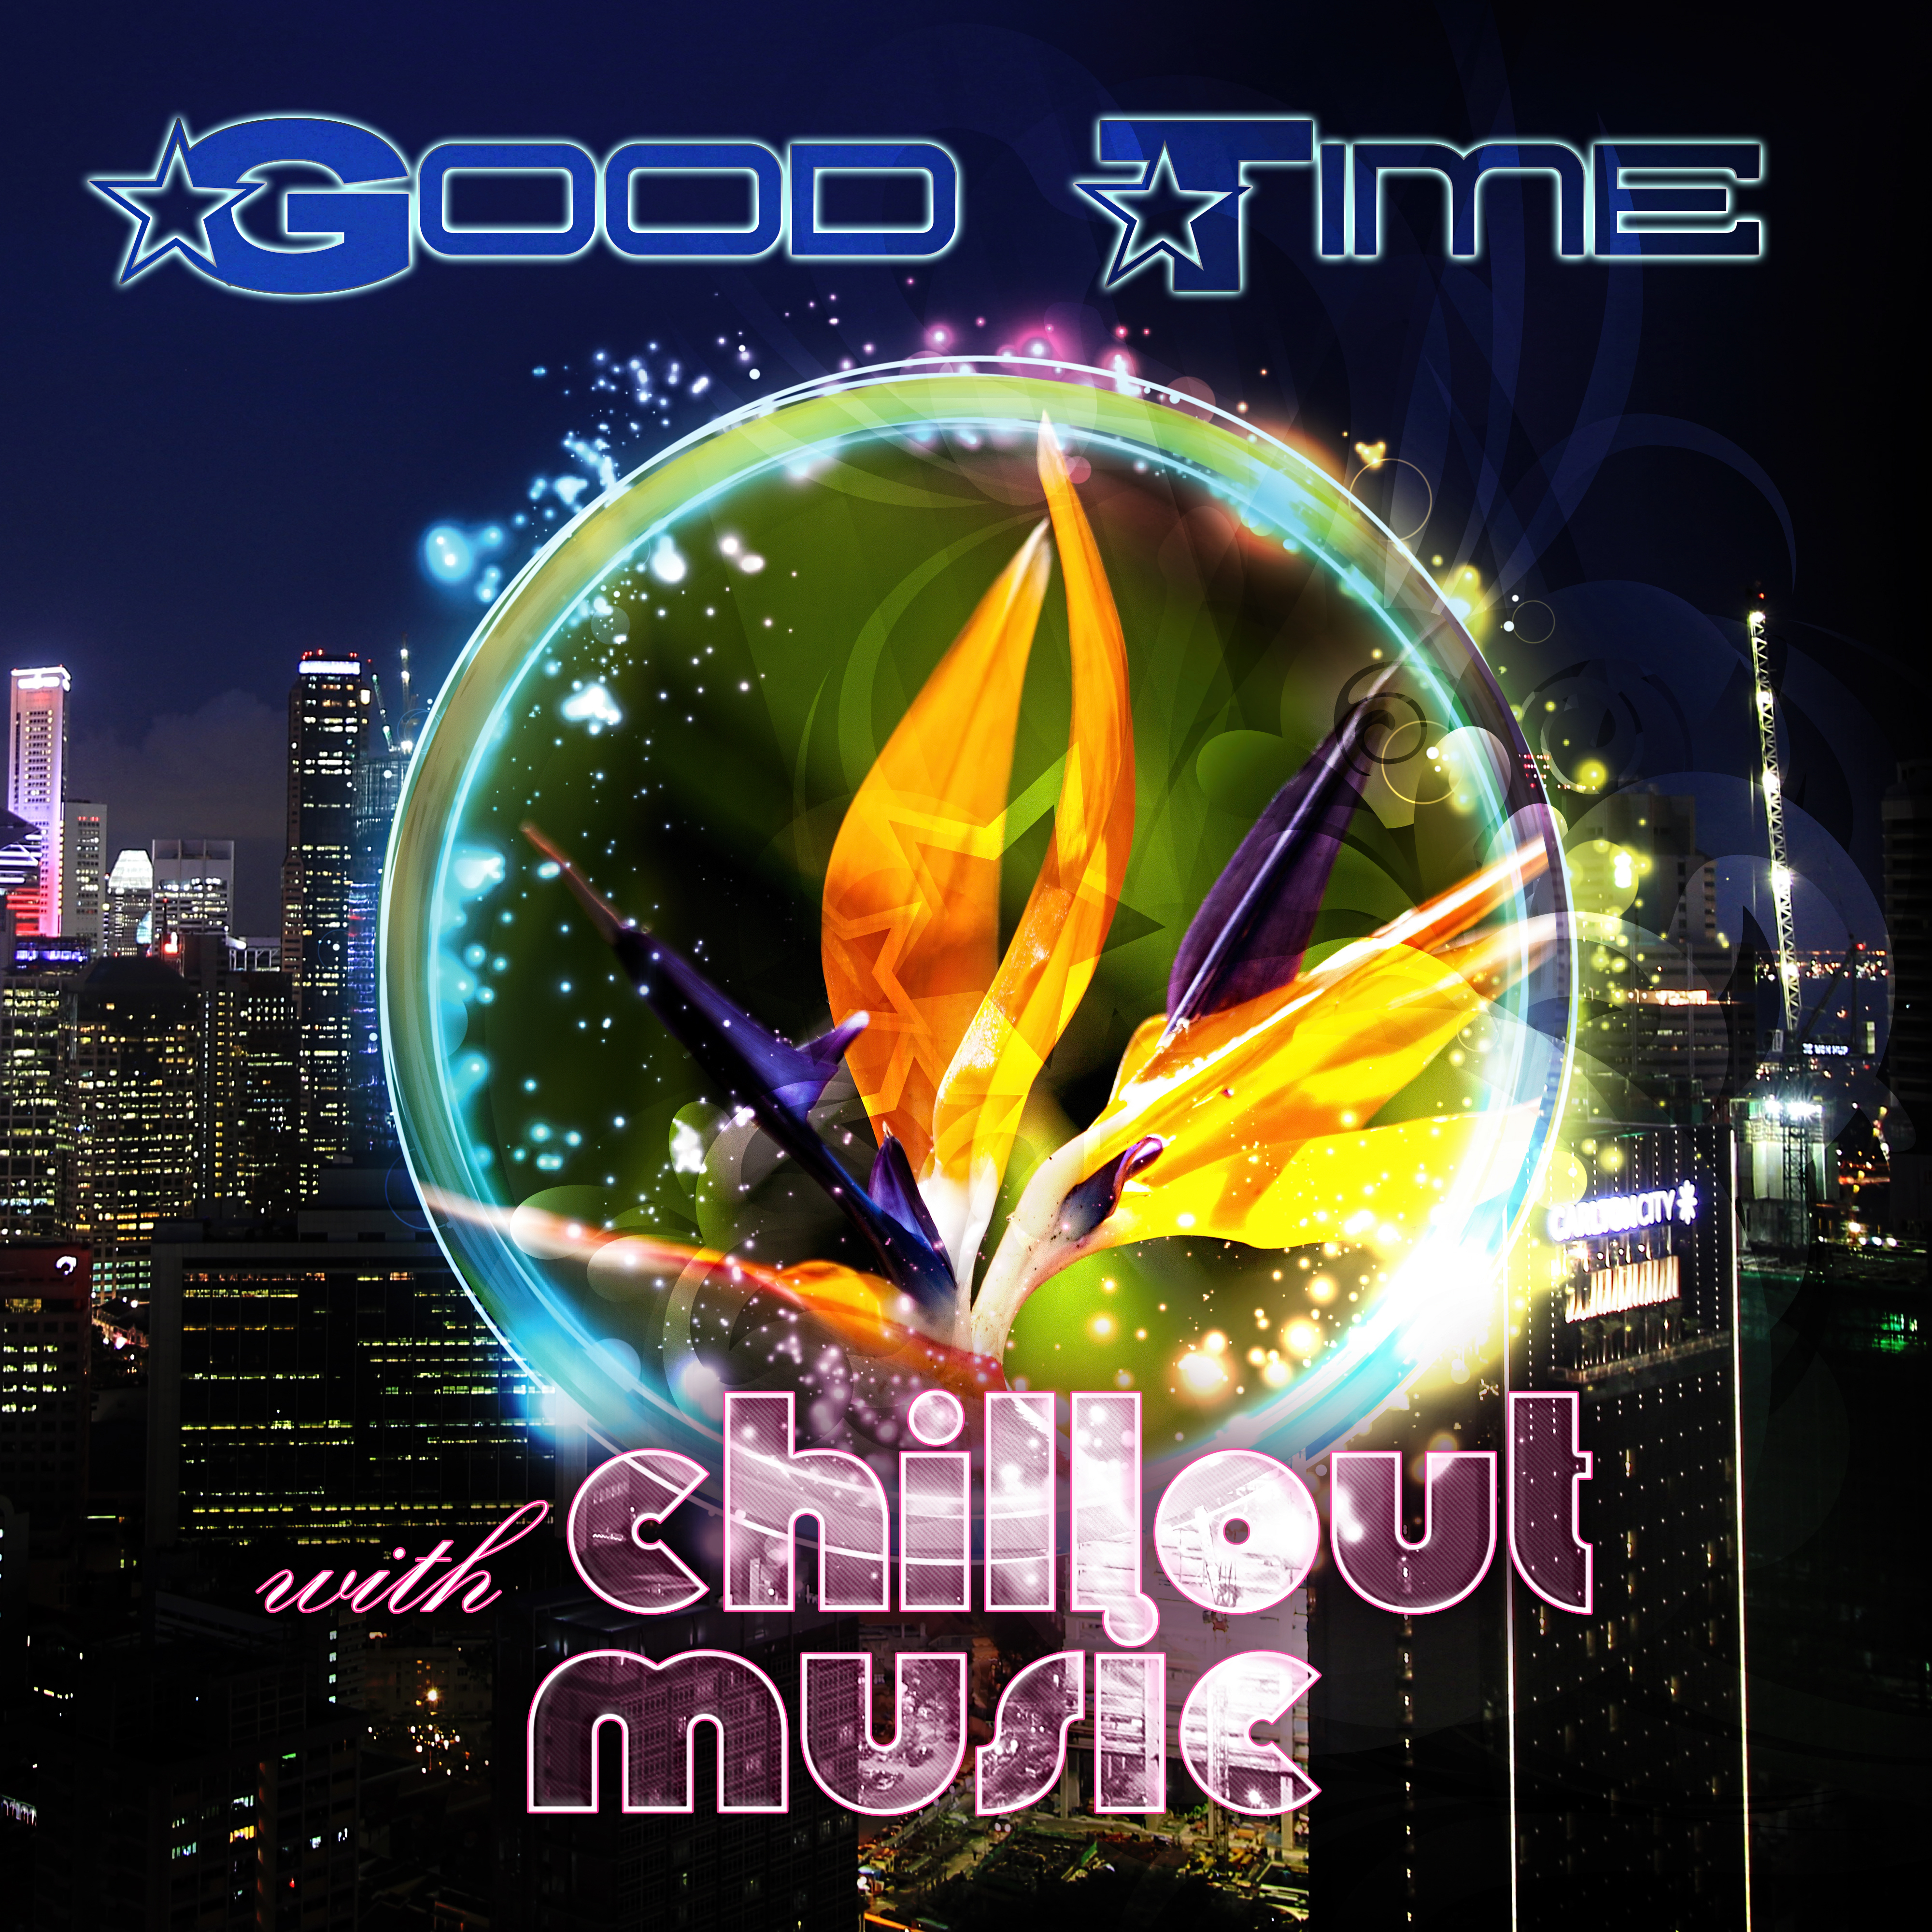 Good Time with Chillout Music  Relaxing Music to Chill Out, Finest Chillout Lounge  Massage Music, Summertime Ibiza Party, Erotic Music to Wind Down, Electronic Background Music to Bar  Cafe